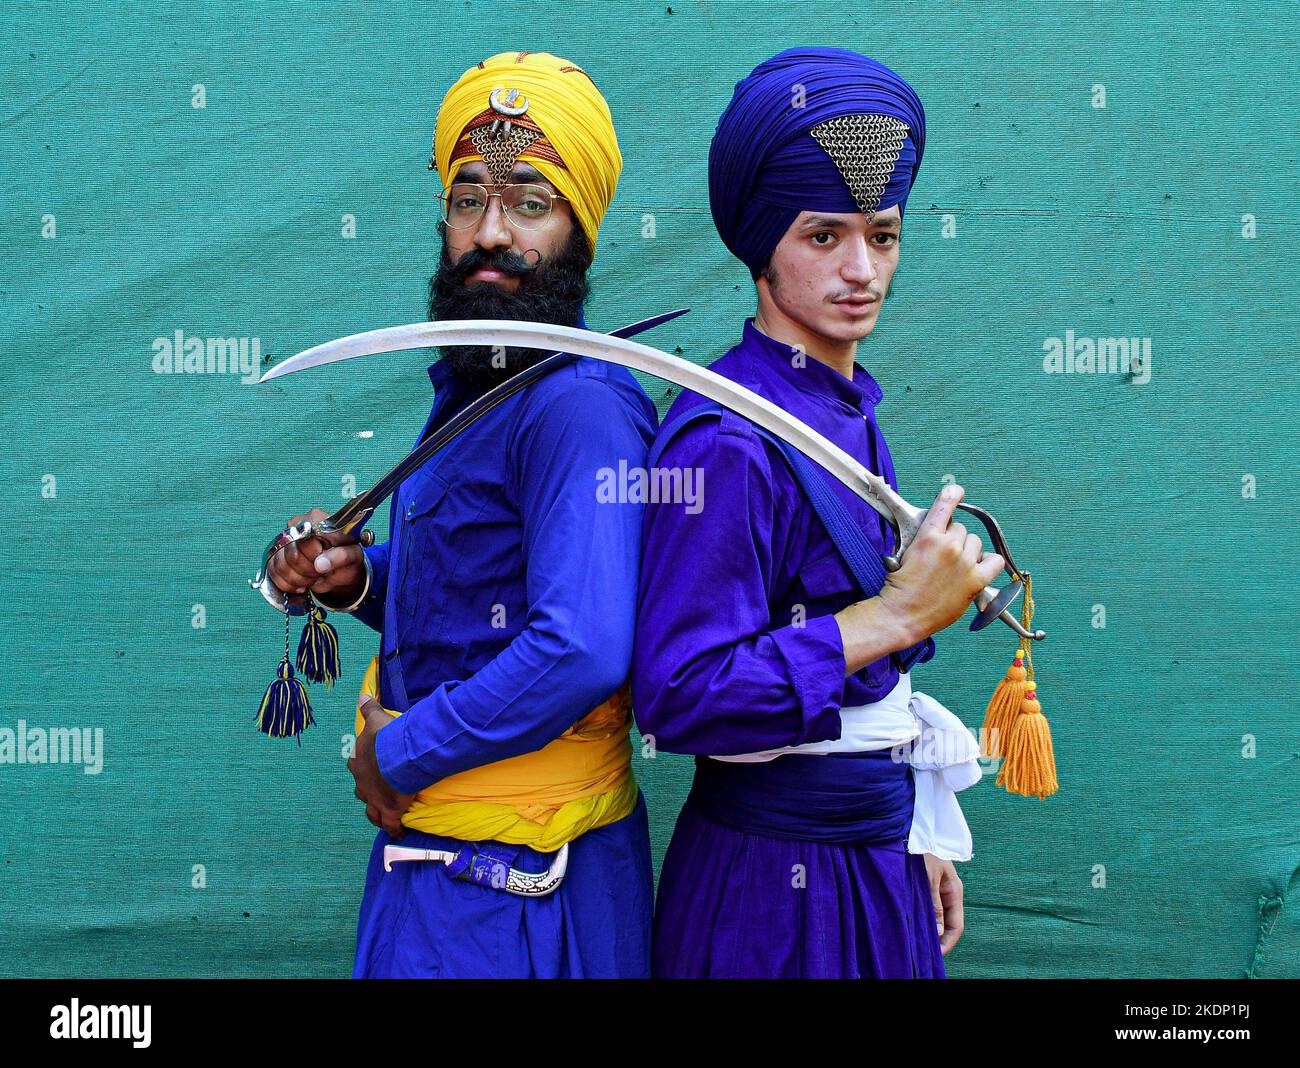 Nihangs or Sikh warriors pose for a photo while holding swords ahead of the birthday celebration of Guru Nanak Dev Ji in Mumbai. Gatka is a Punjabi word that translates to wooden sticks, which are used instead of swords. it uses a sword as the main weapon, amongst others. person's spiritual and physical aspect is developed during the learning phase of this ancient art. Gatka was extensively used by Sikh warriors to defend themselves from the atrocities of the Mughals and the British rulers. (Photo by Ashish Vaishnav/SOPA Images/Sipa USA) Stock Photo